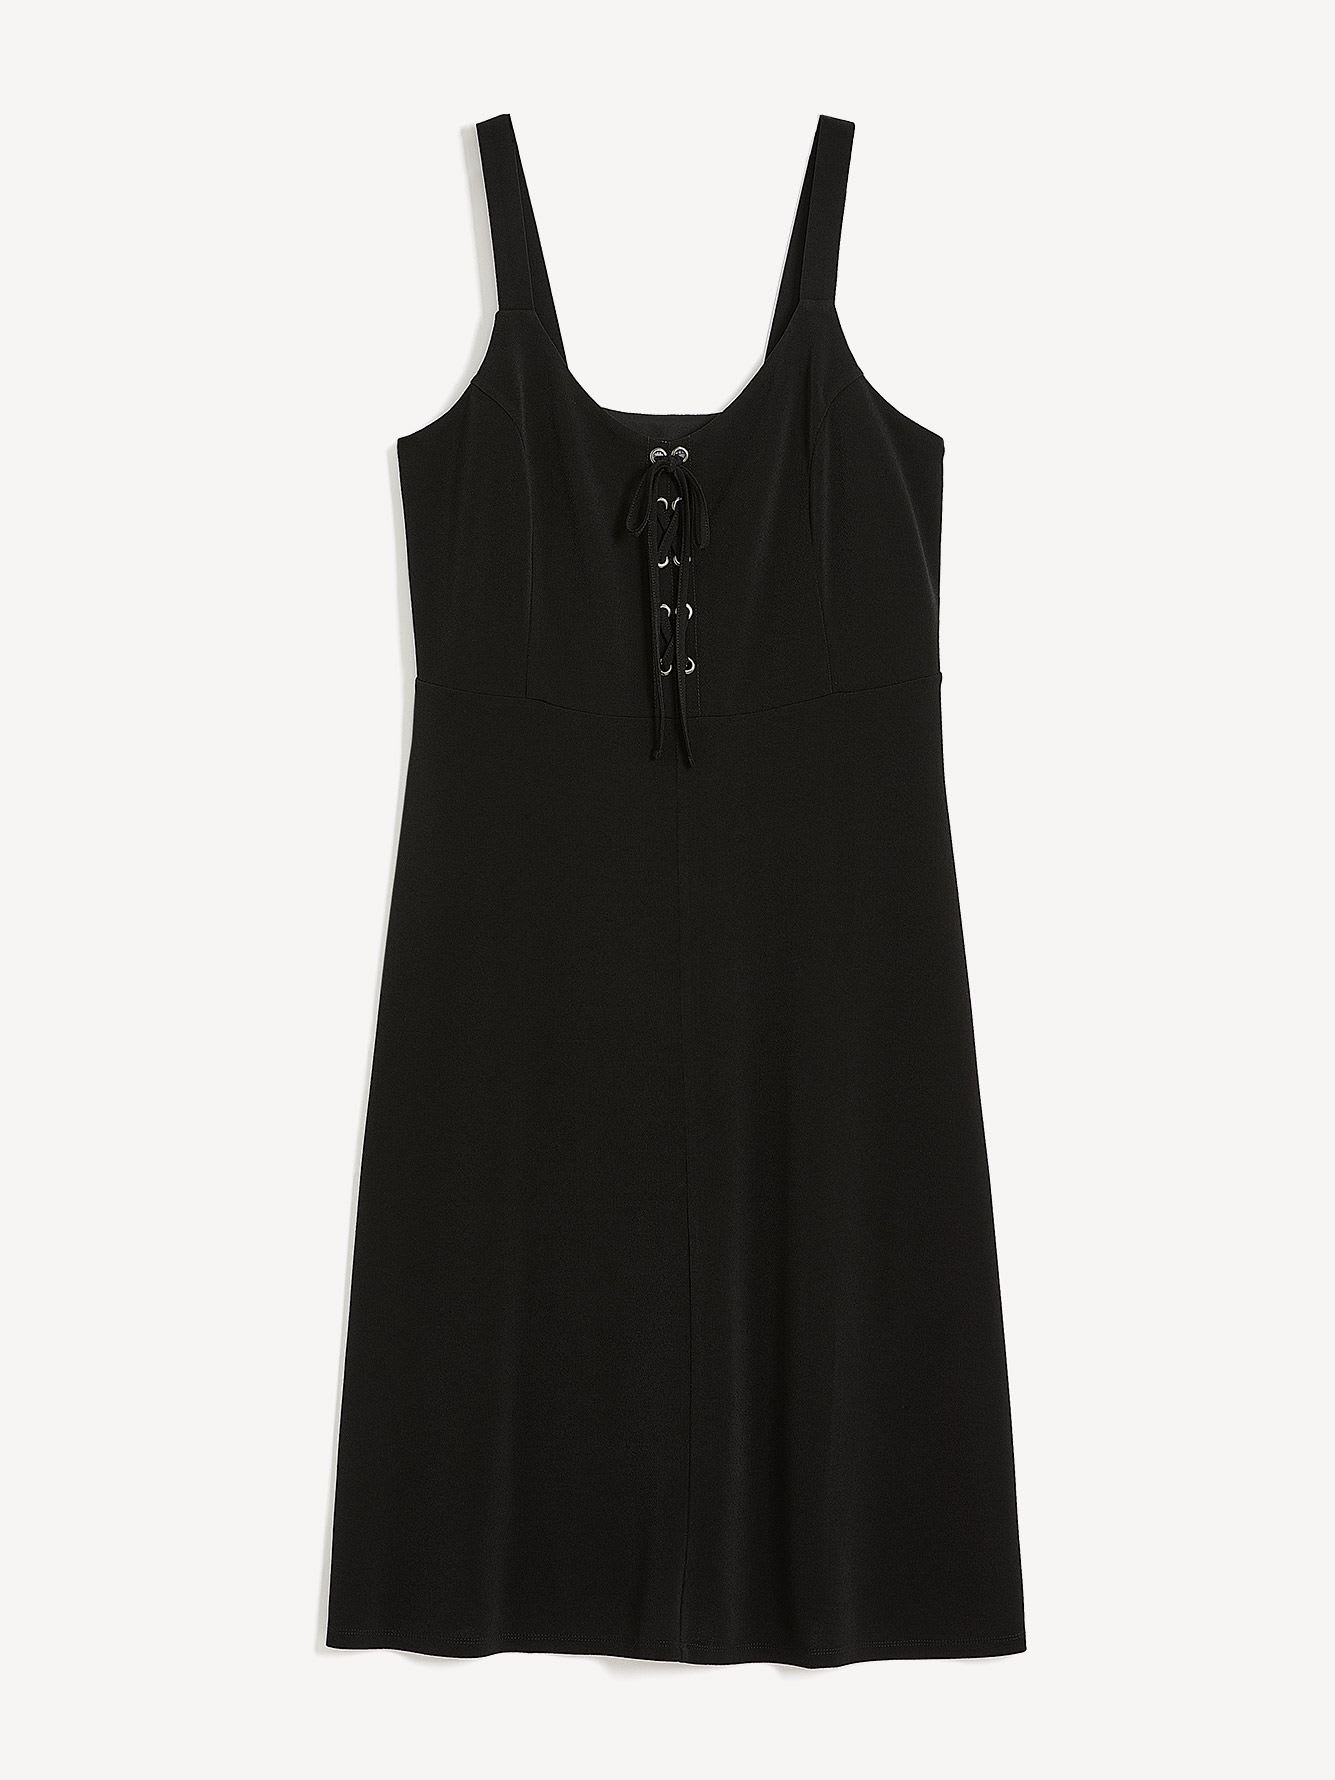 Black Sleeveless Midi Dress with Lace-up Front - Addition Elle